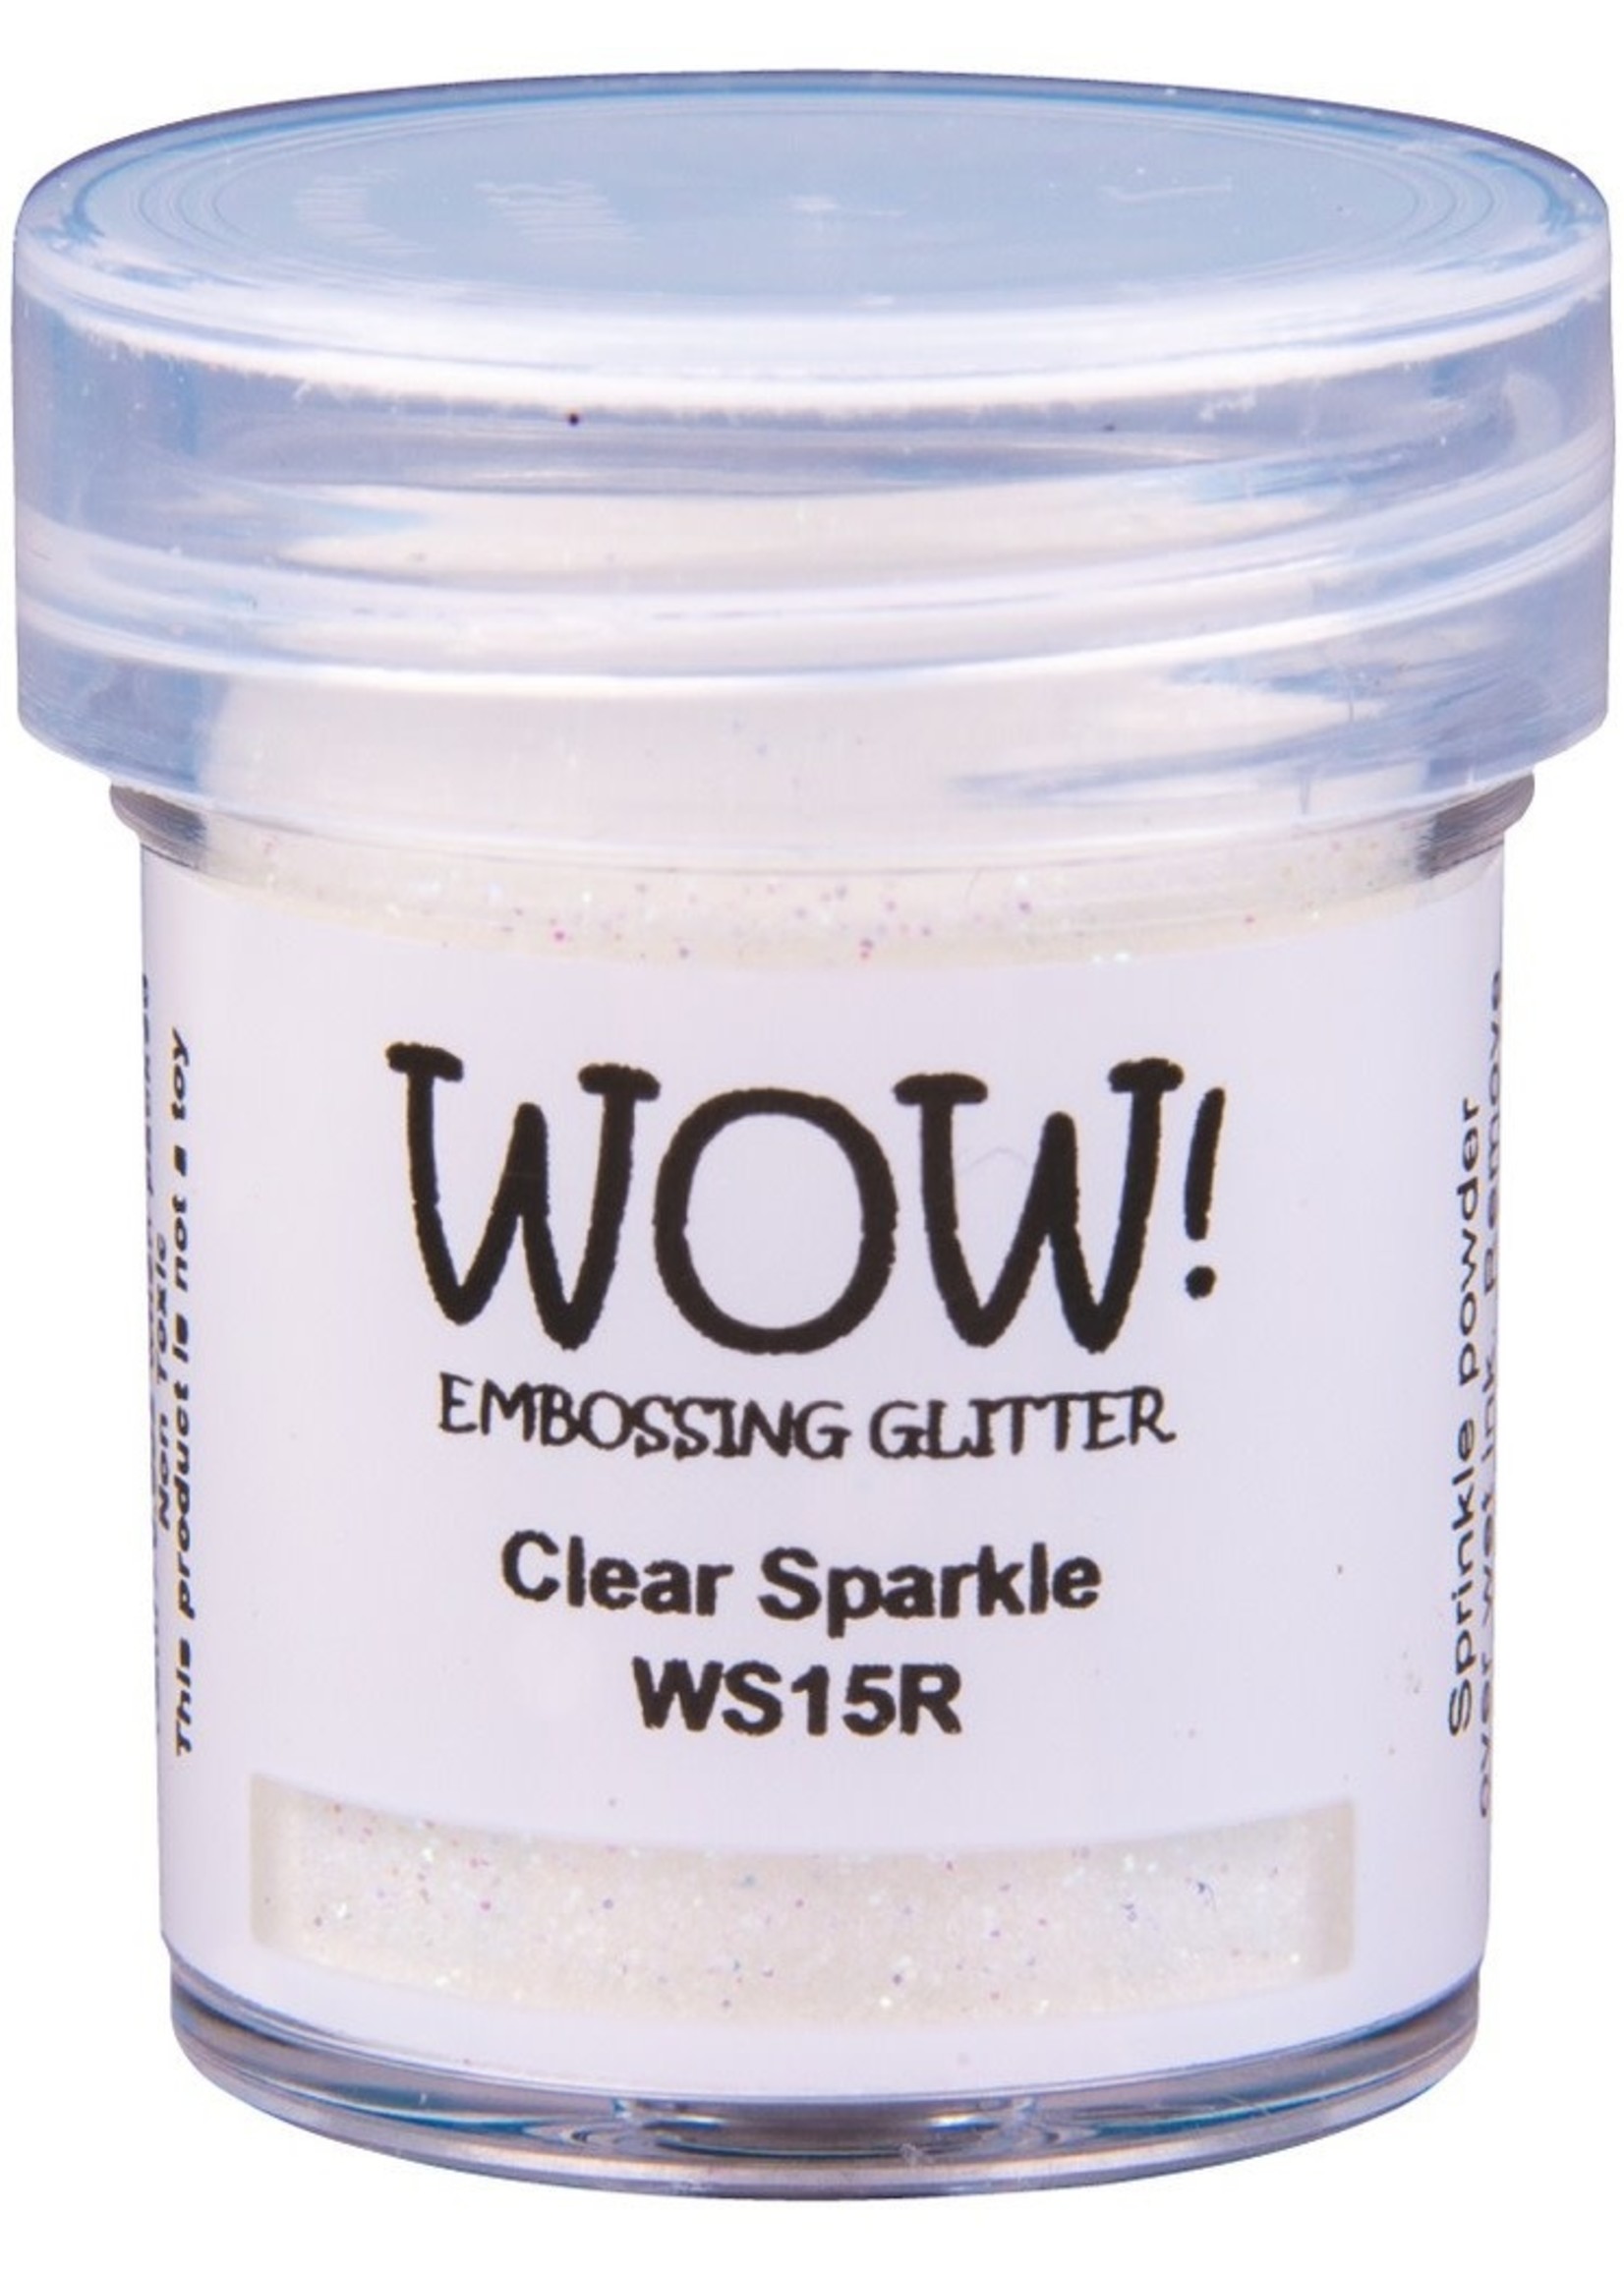 WOW! WOW! Embossing Glitter, Clear Sparkle